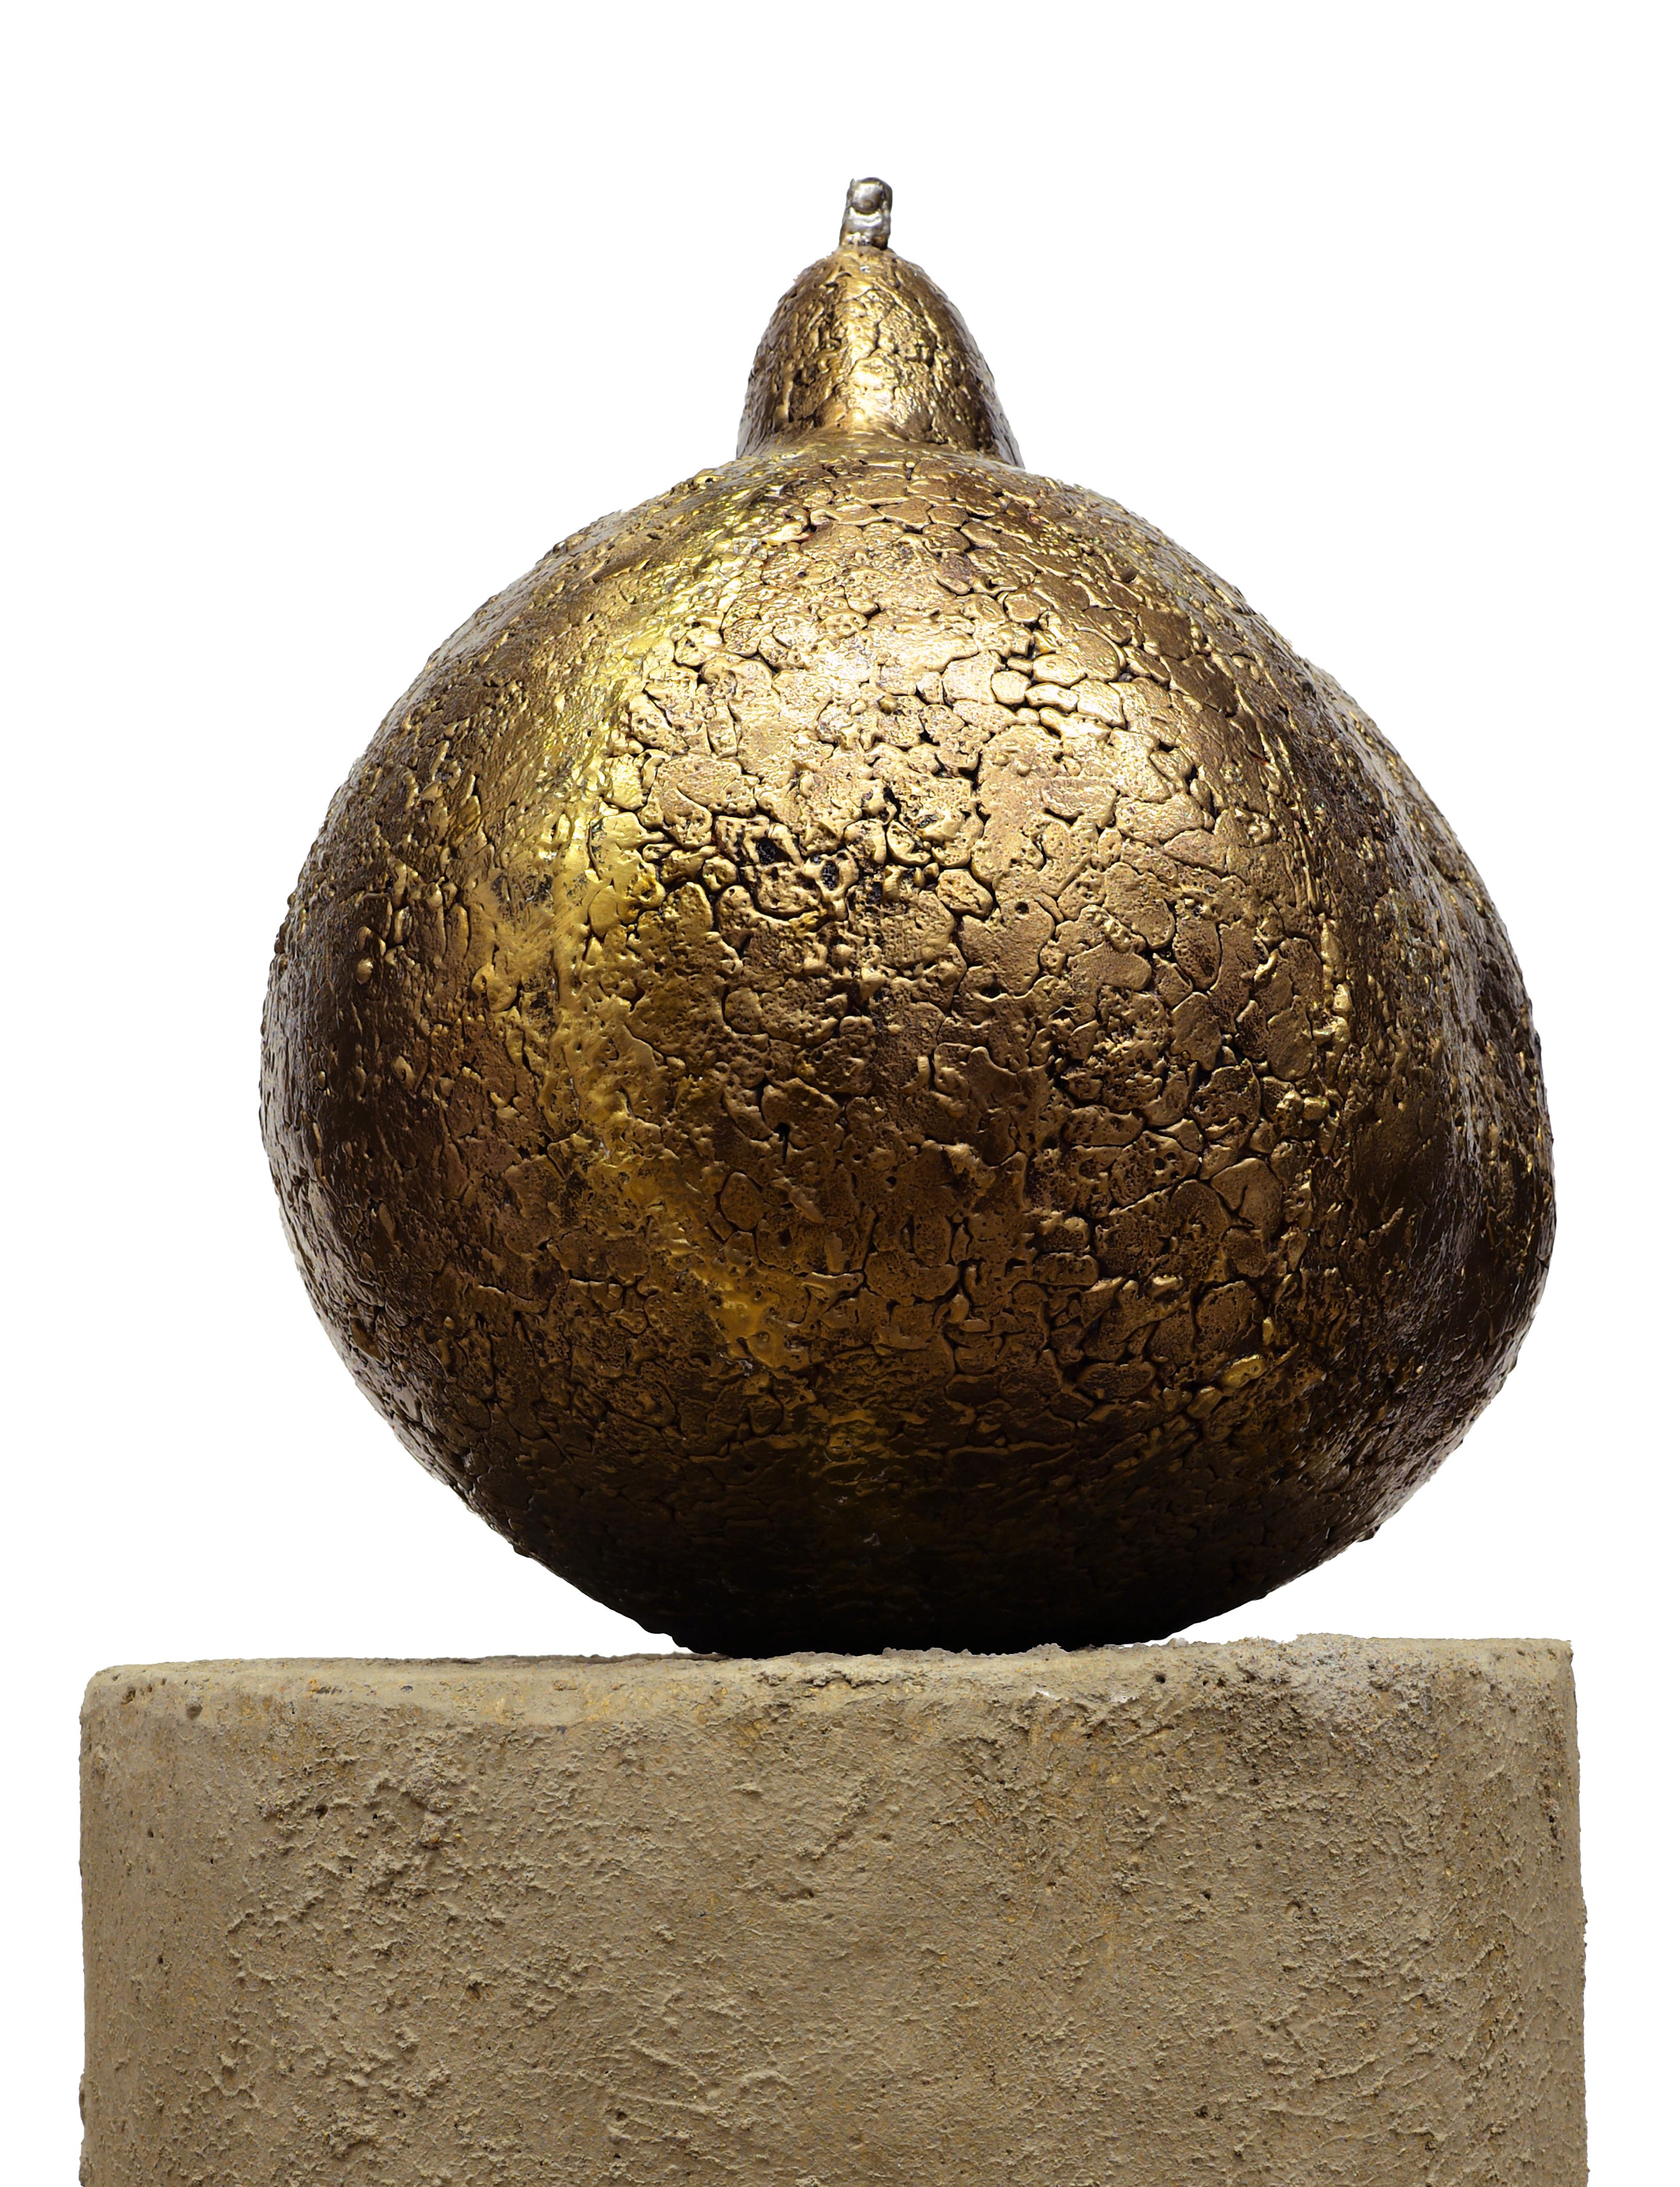 Hand-Crafted Summer Pear, Bronze Sculpture with Textured Golden Surface on Concrete Base For Sale